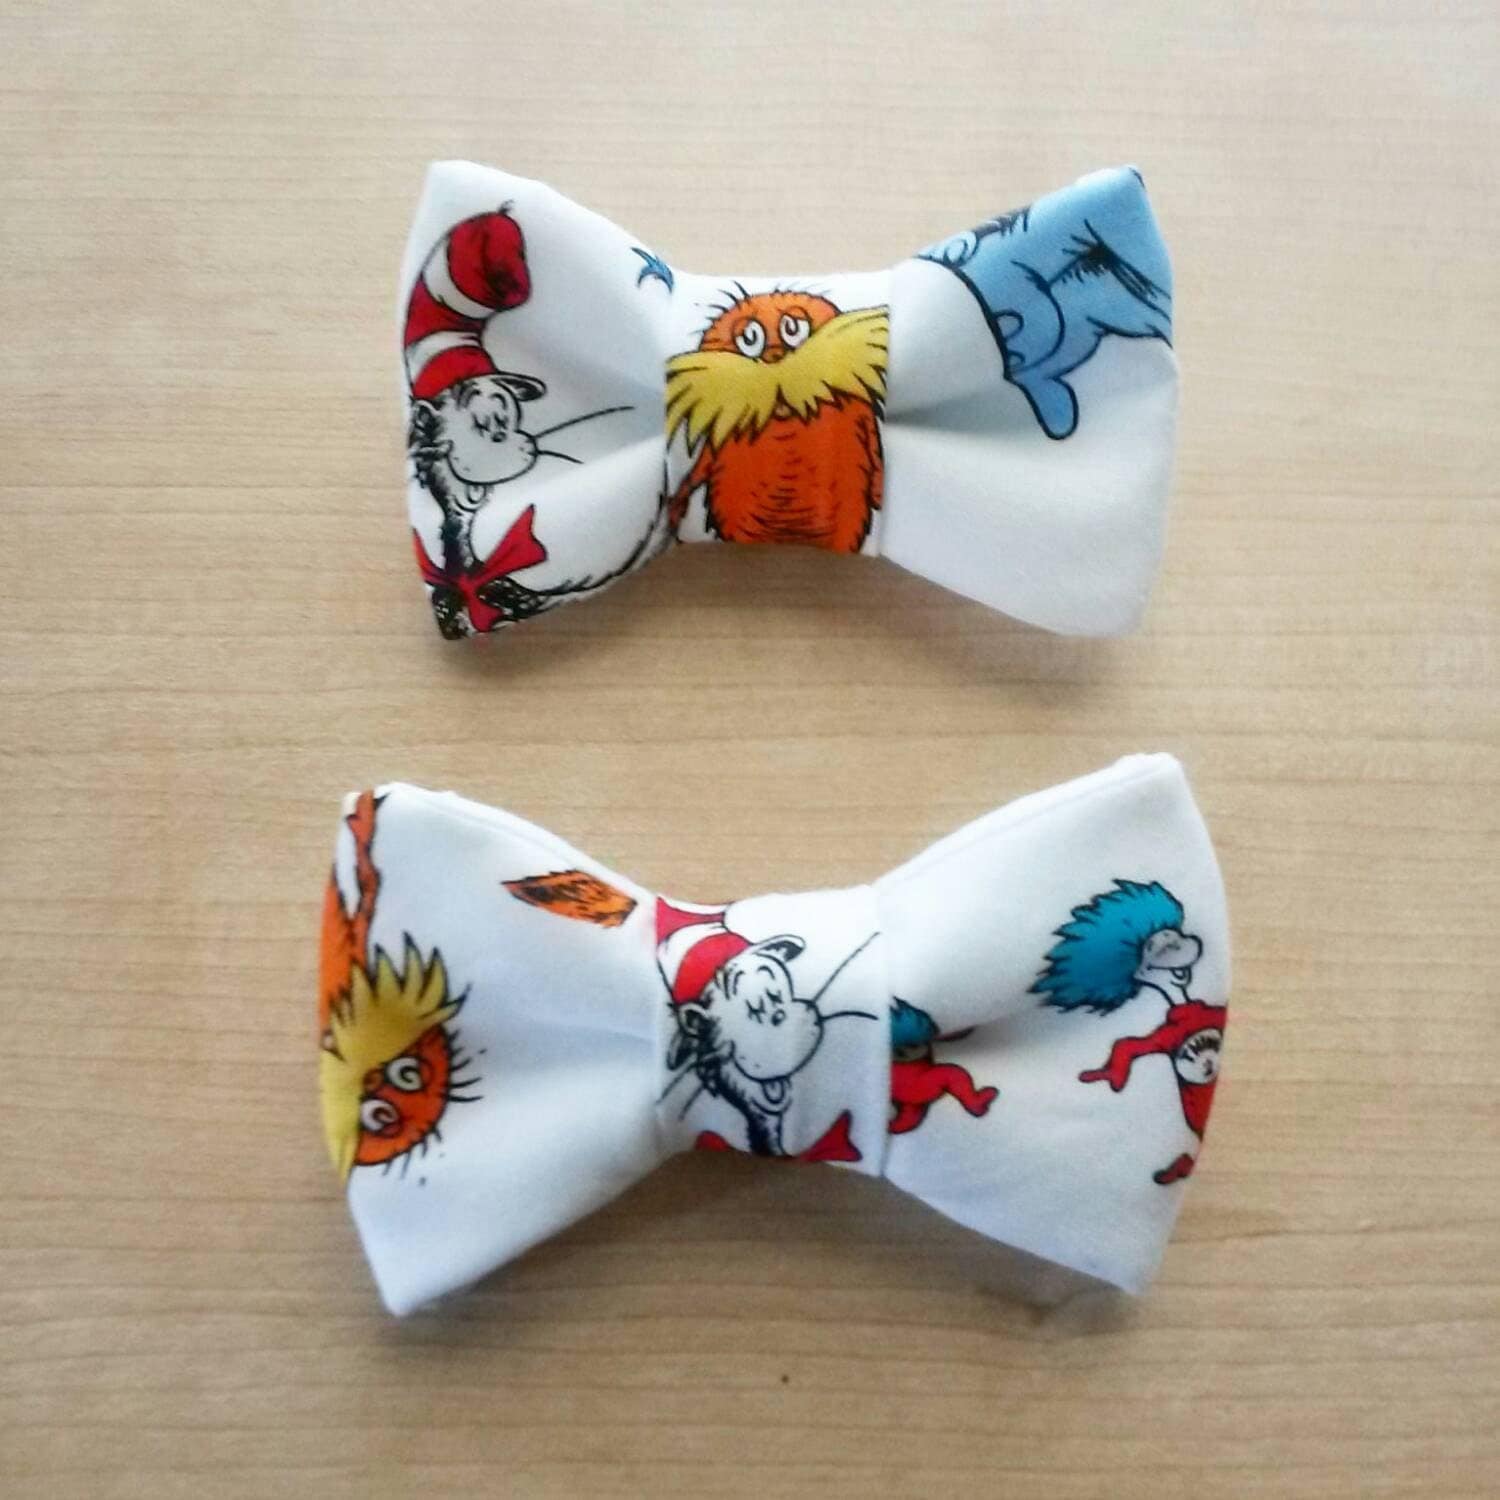 Clip on Dr. Seuss Inspired Bow tie or Hair Bow. ANY SIZE.